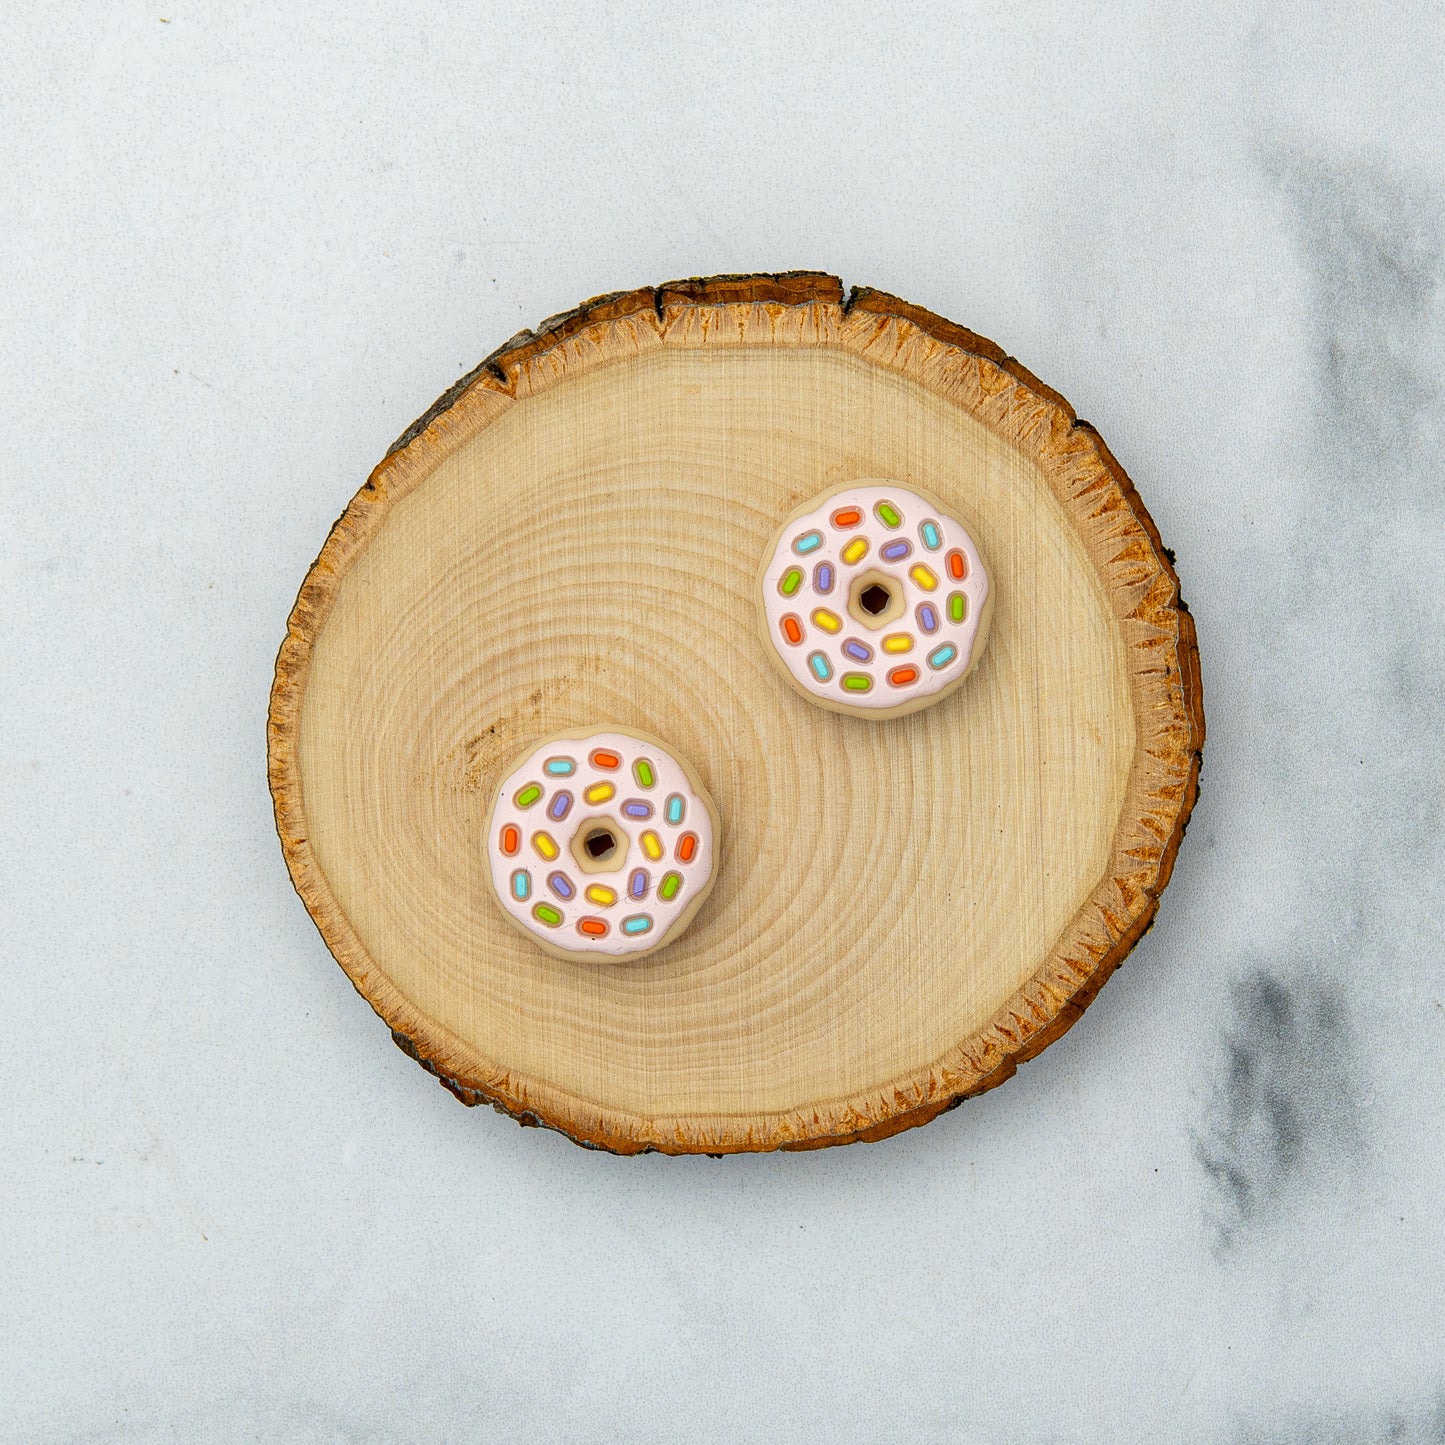 Donuts Needle Stopper Set